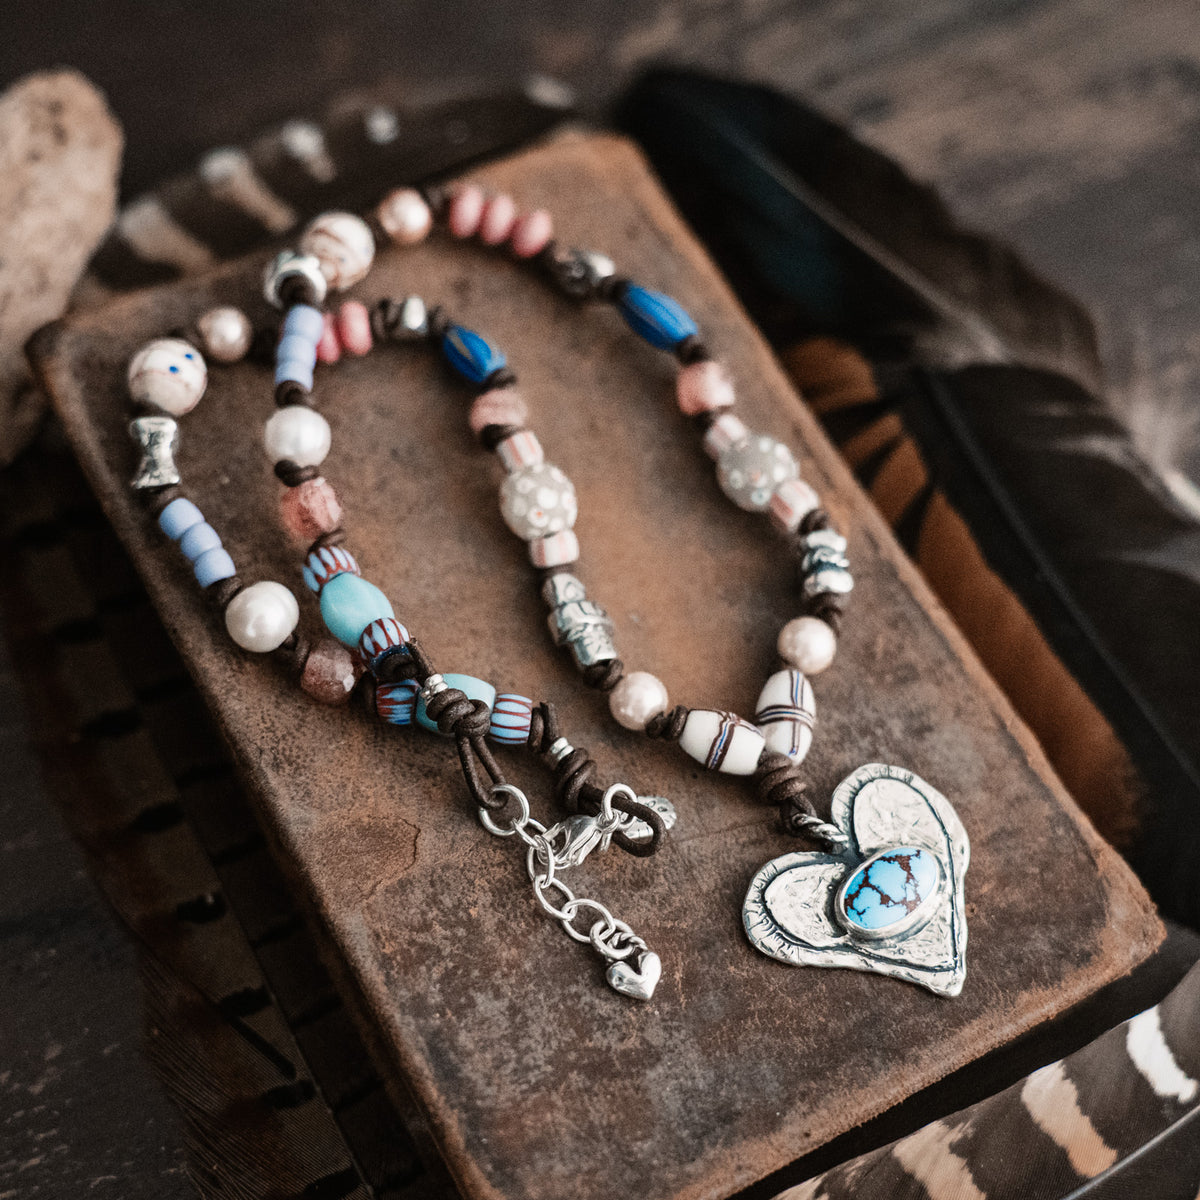 Brave Heart Woodstock Turquoise Necklace